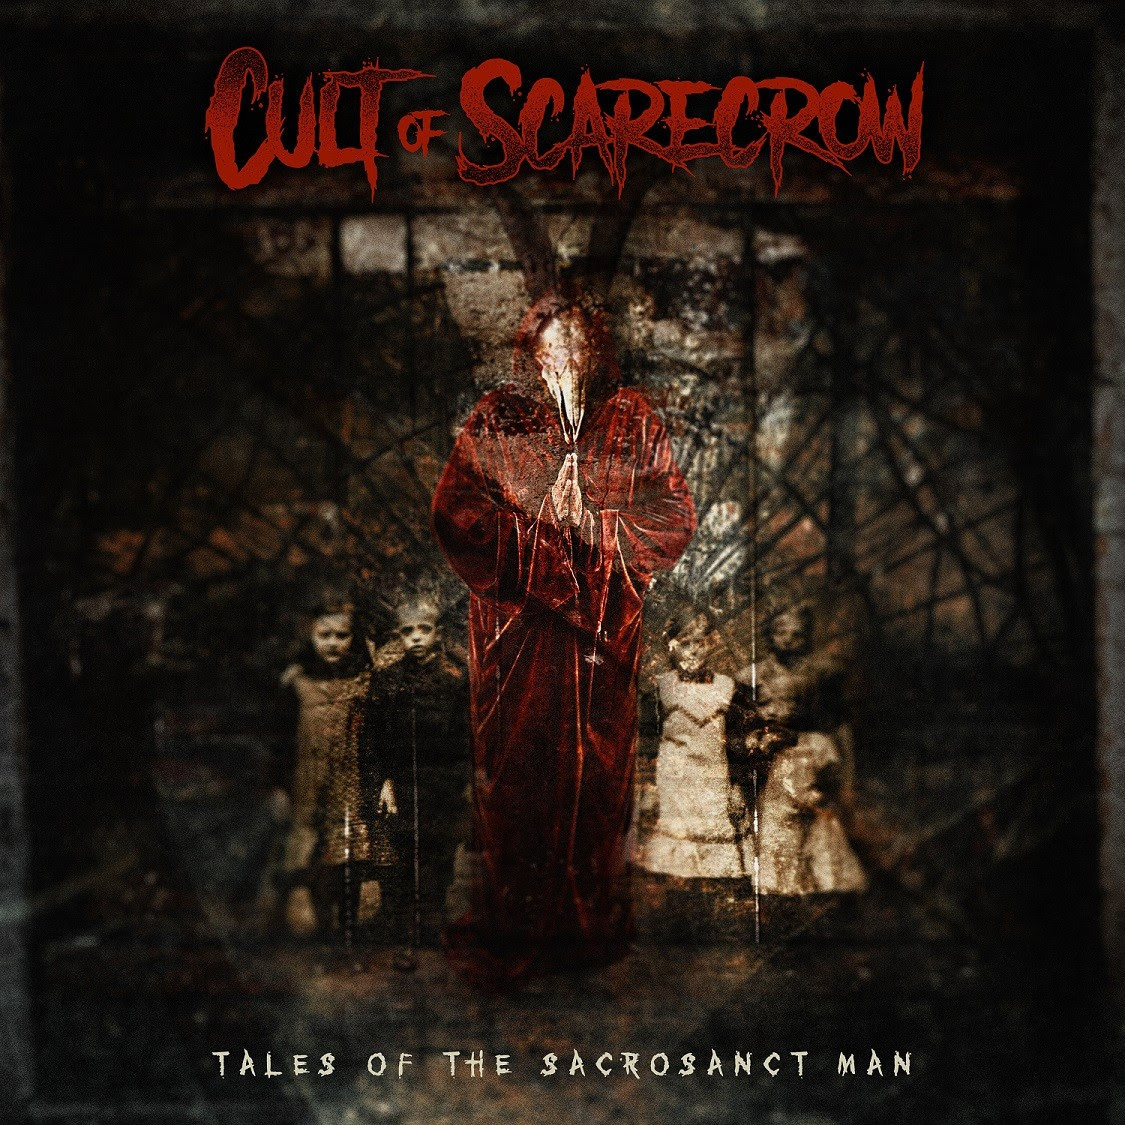 CULT OF SCARECROW – Sign With Wormholedeath